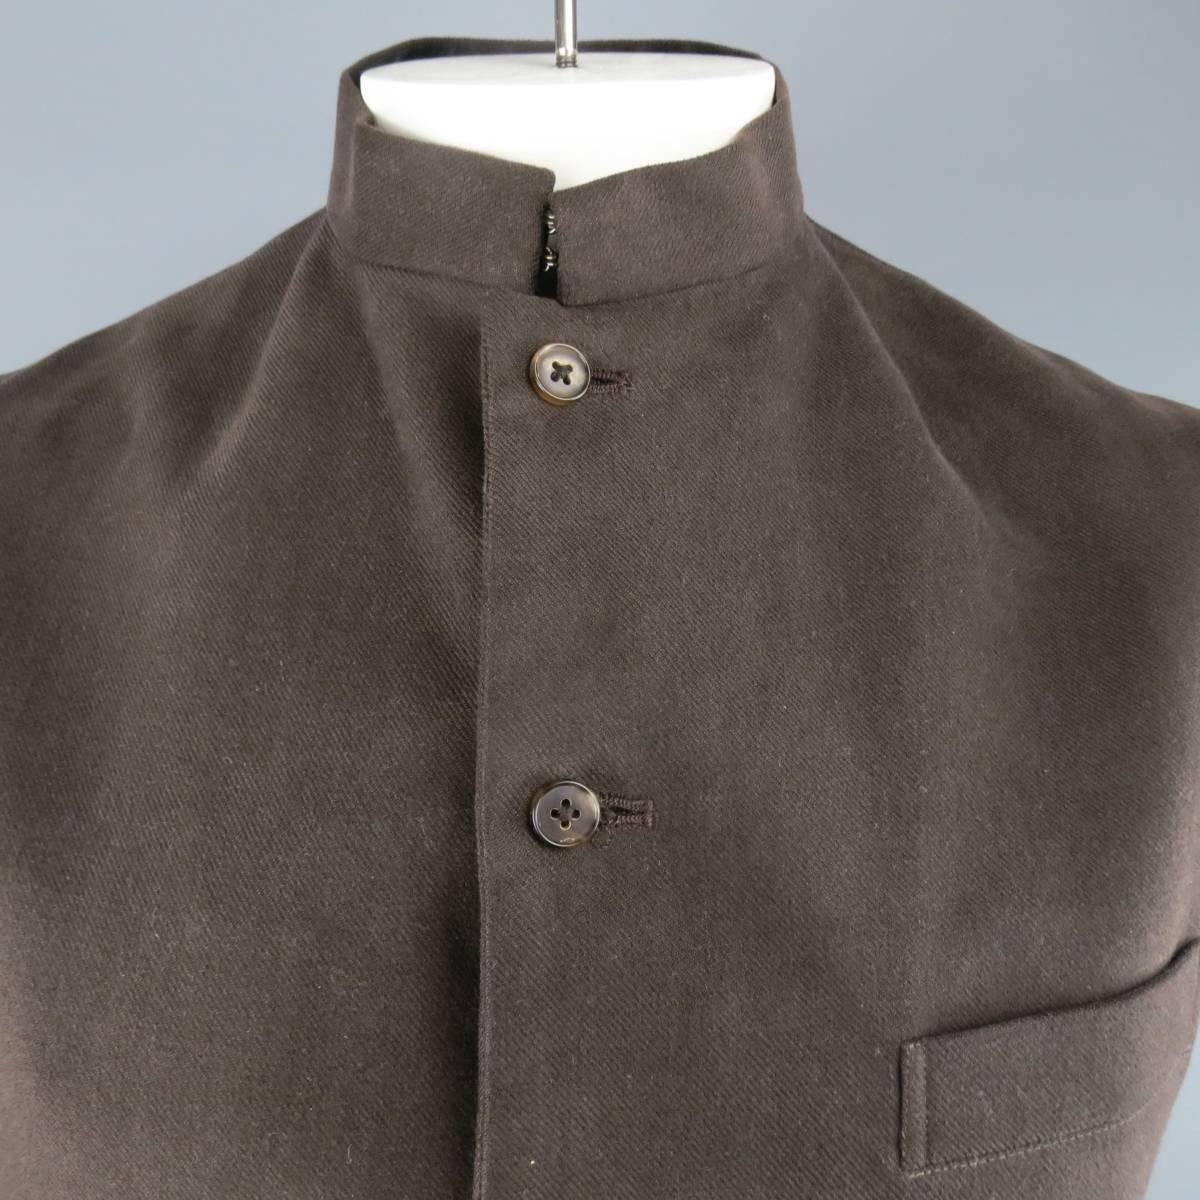 Y'S BY YOHJI YAMAMOTO vest in a brown cotton twill featuring a button up front and nehru band collar with hook eye closures. Made in Japan.
 
Excellent Pre-Owned Condition.
Marked: L
 
Measurements:
 
Shoulder: 16.5 in.
Chest: 42 in.
Length: 28 in.